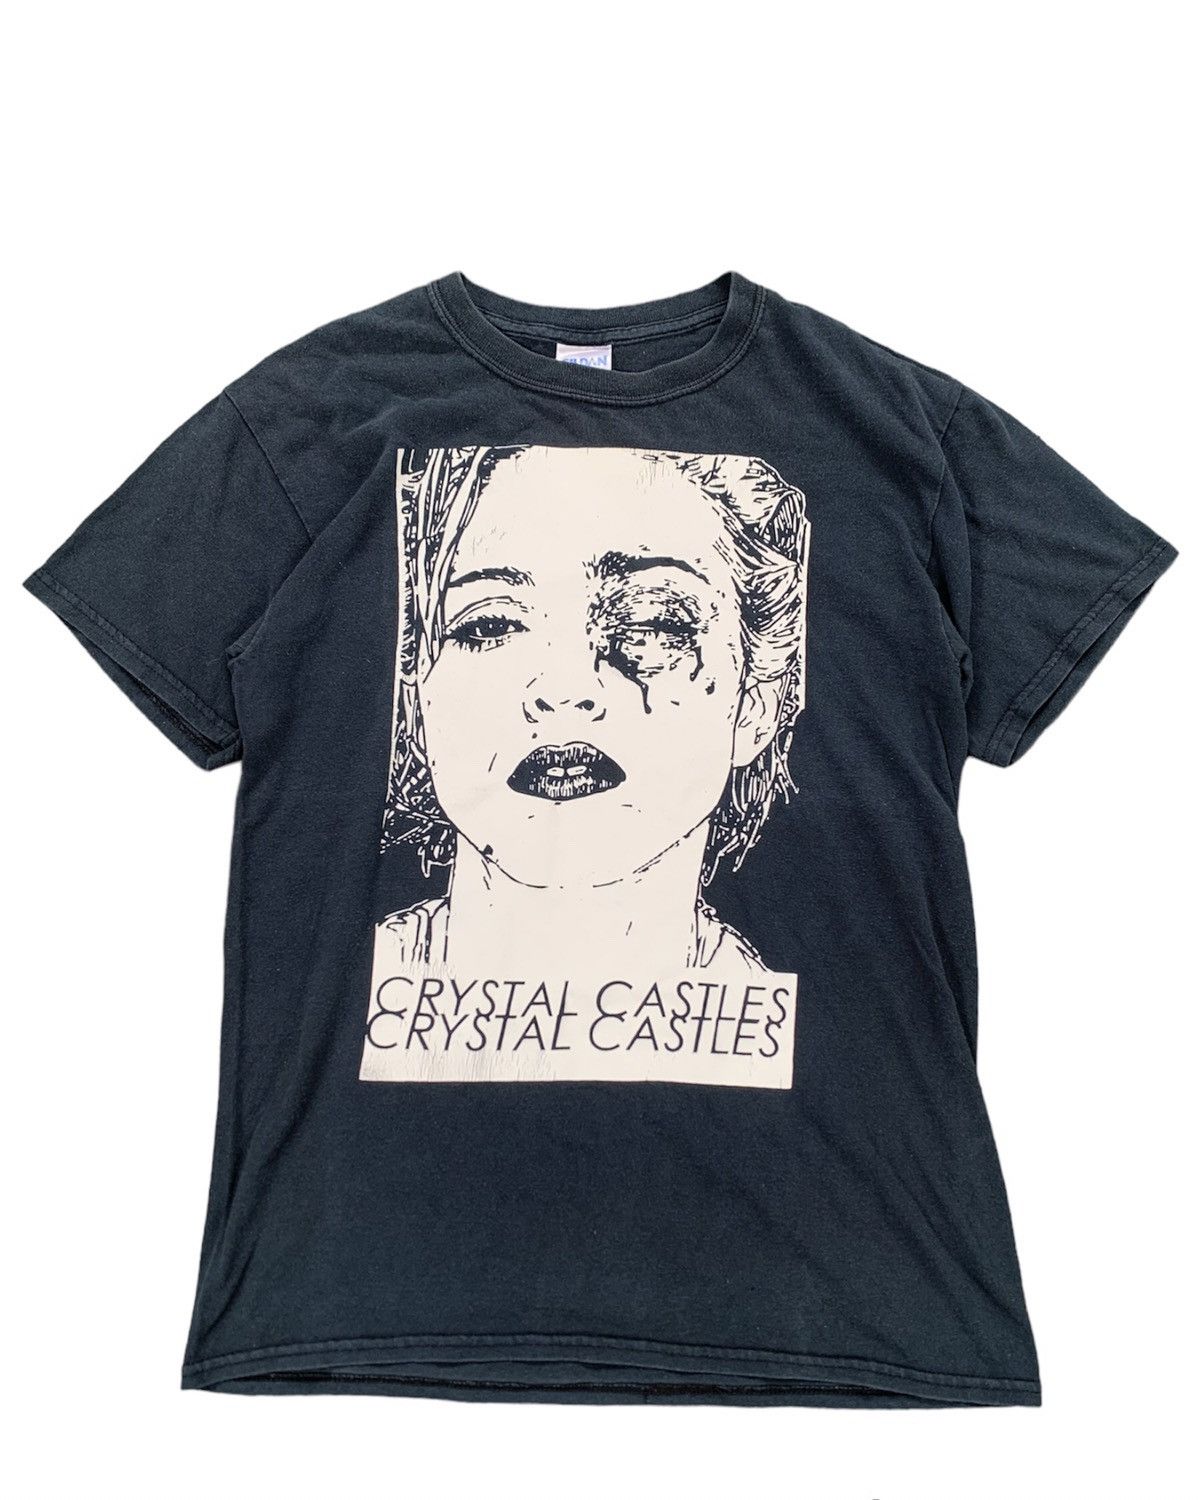 Pre-owned Band Tees X Vintage Crystal Castles Madonna Potrait Shirt In Black